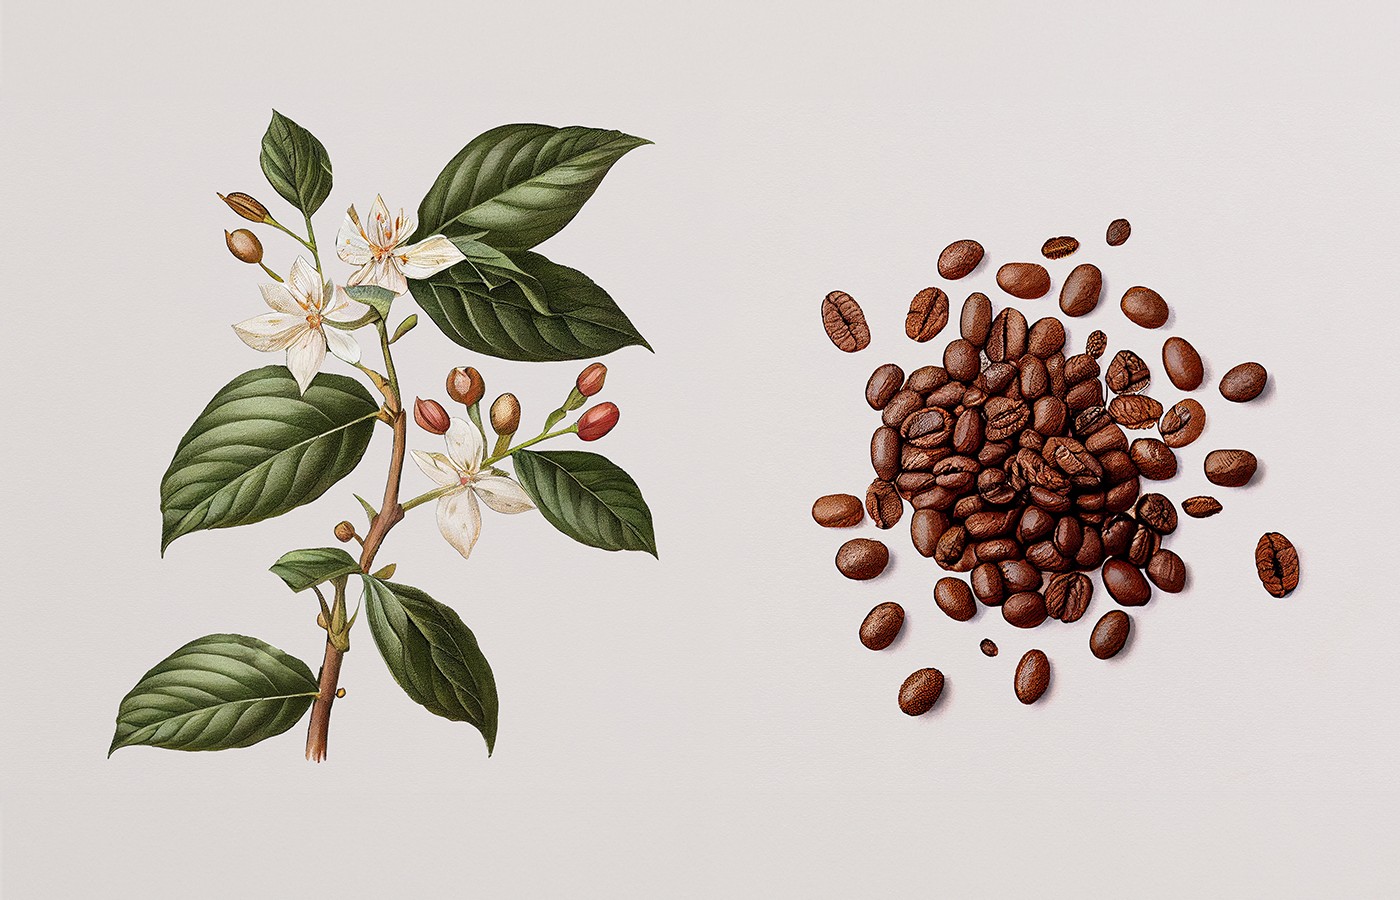 The Herb Coffea (Coffee) in  Chinese Medicine